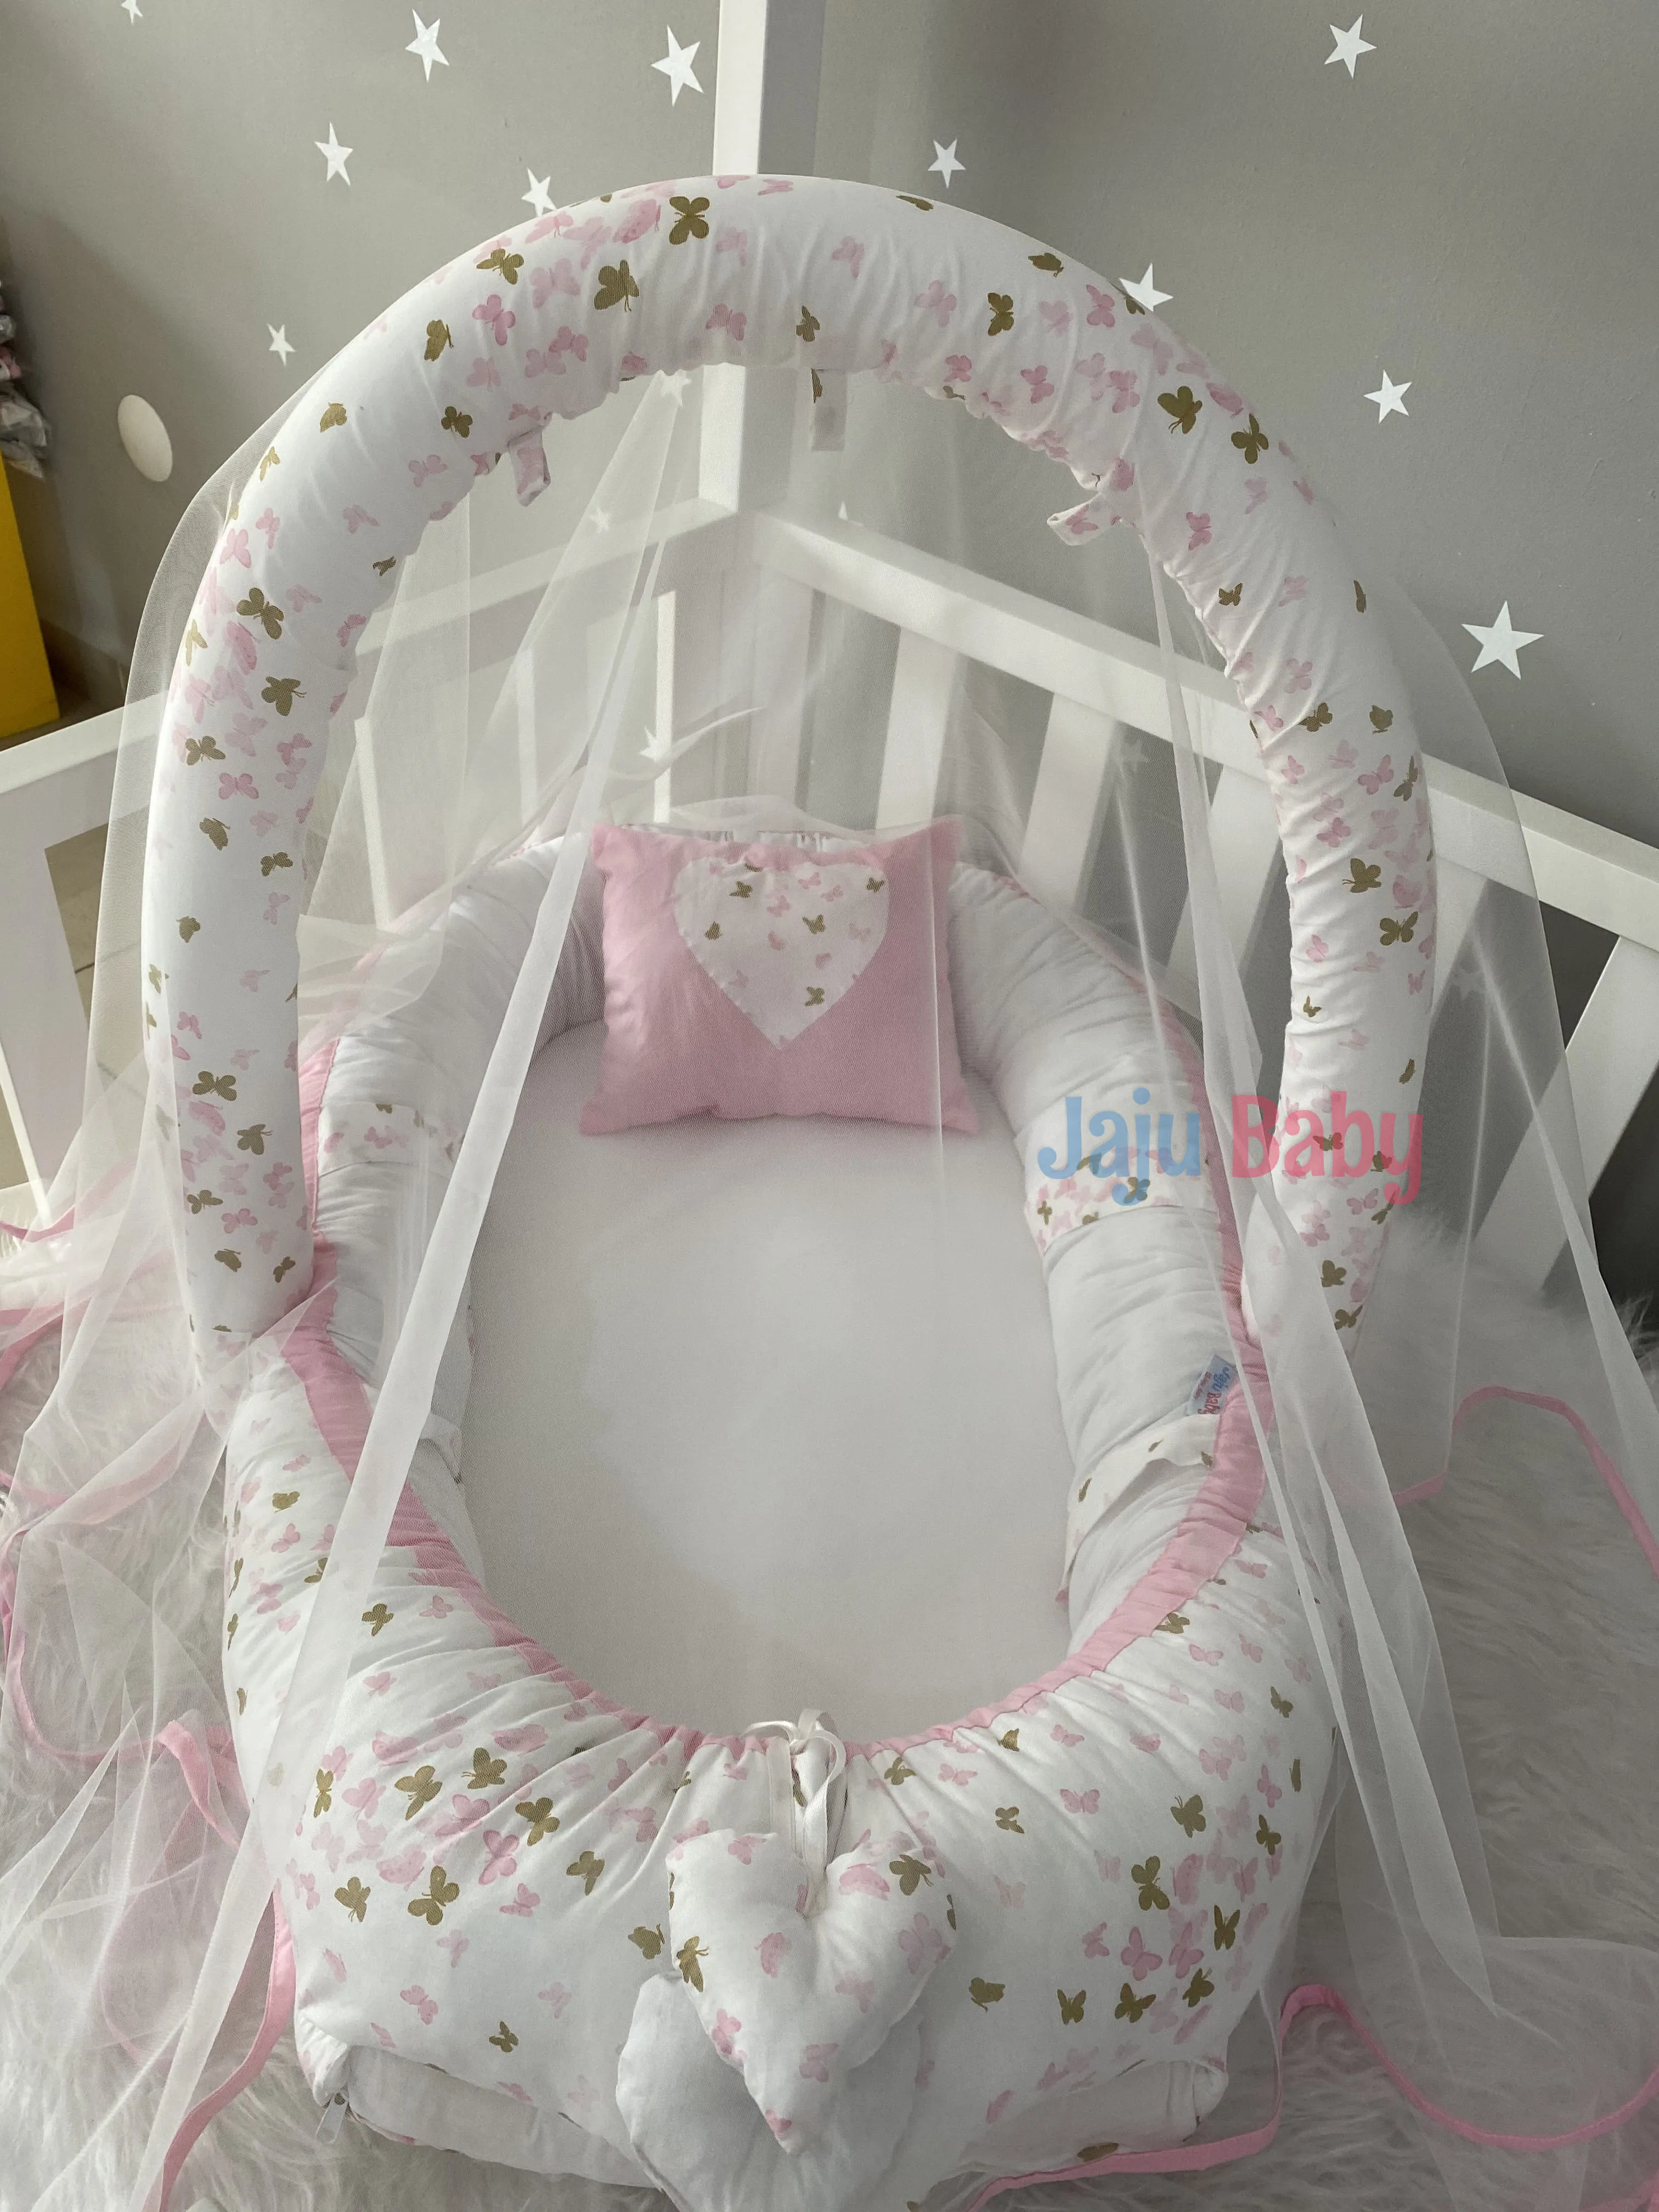 Jaju Baby Handmade Pink Butterfly Patterned Mosquito Net and Toy Apparatus Luxury Design Babynest Mother Side Portable Baby Bed